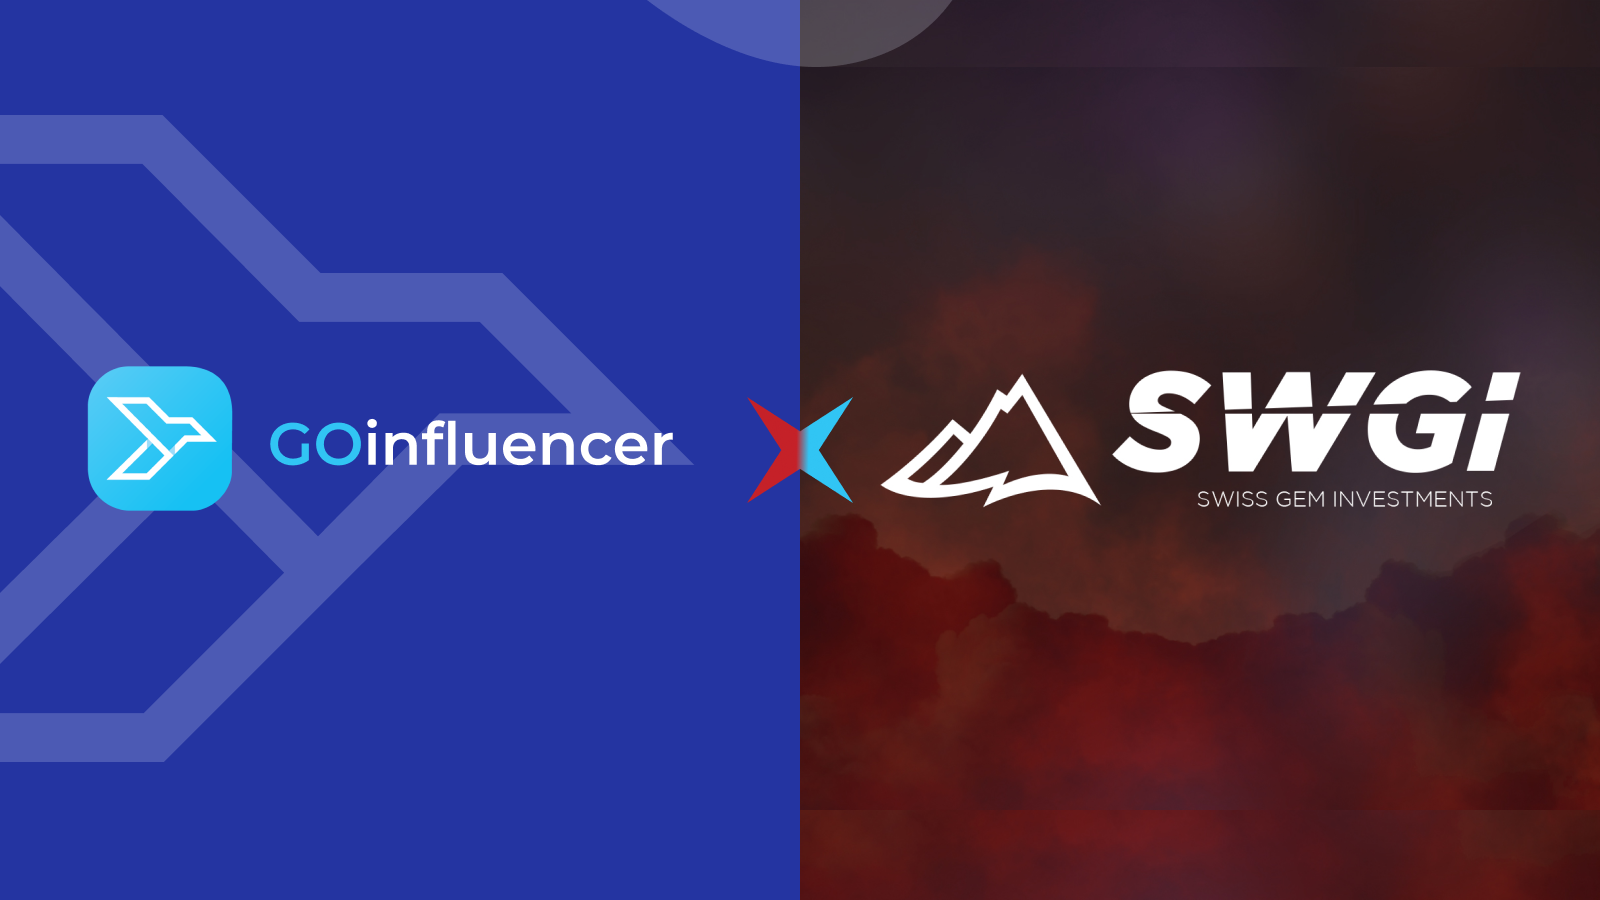 Swiss Gem Investments (SWGI) invests in GOinfluencer